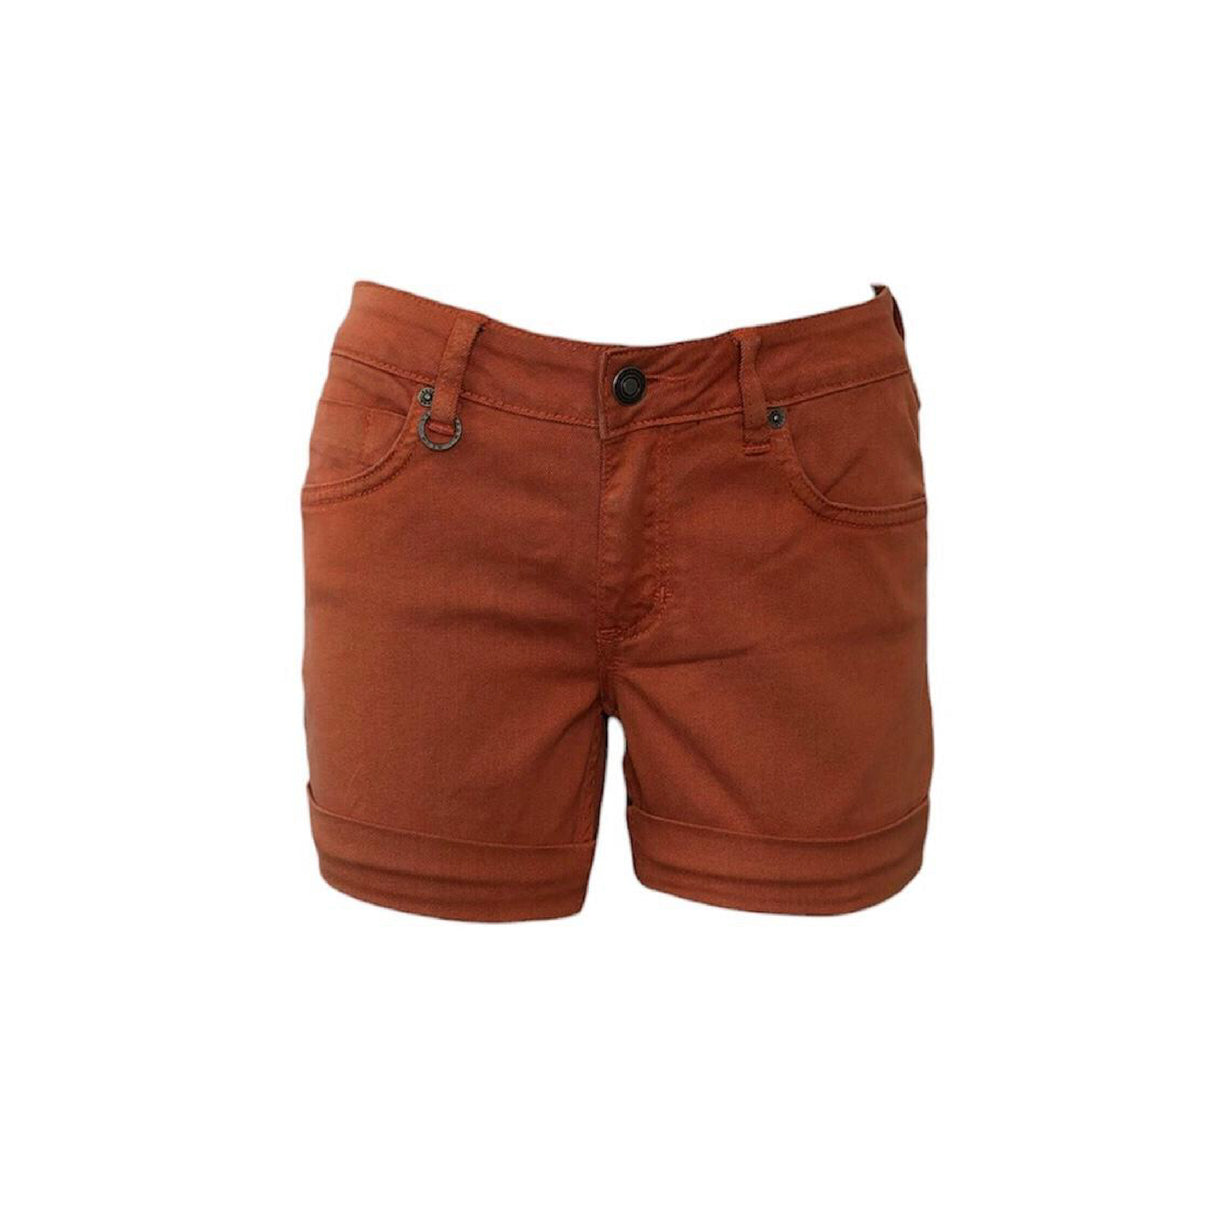 A Second Chance - Neuw Global 27-32 Short Orange Women - Delivery All Over Lebanon